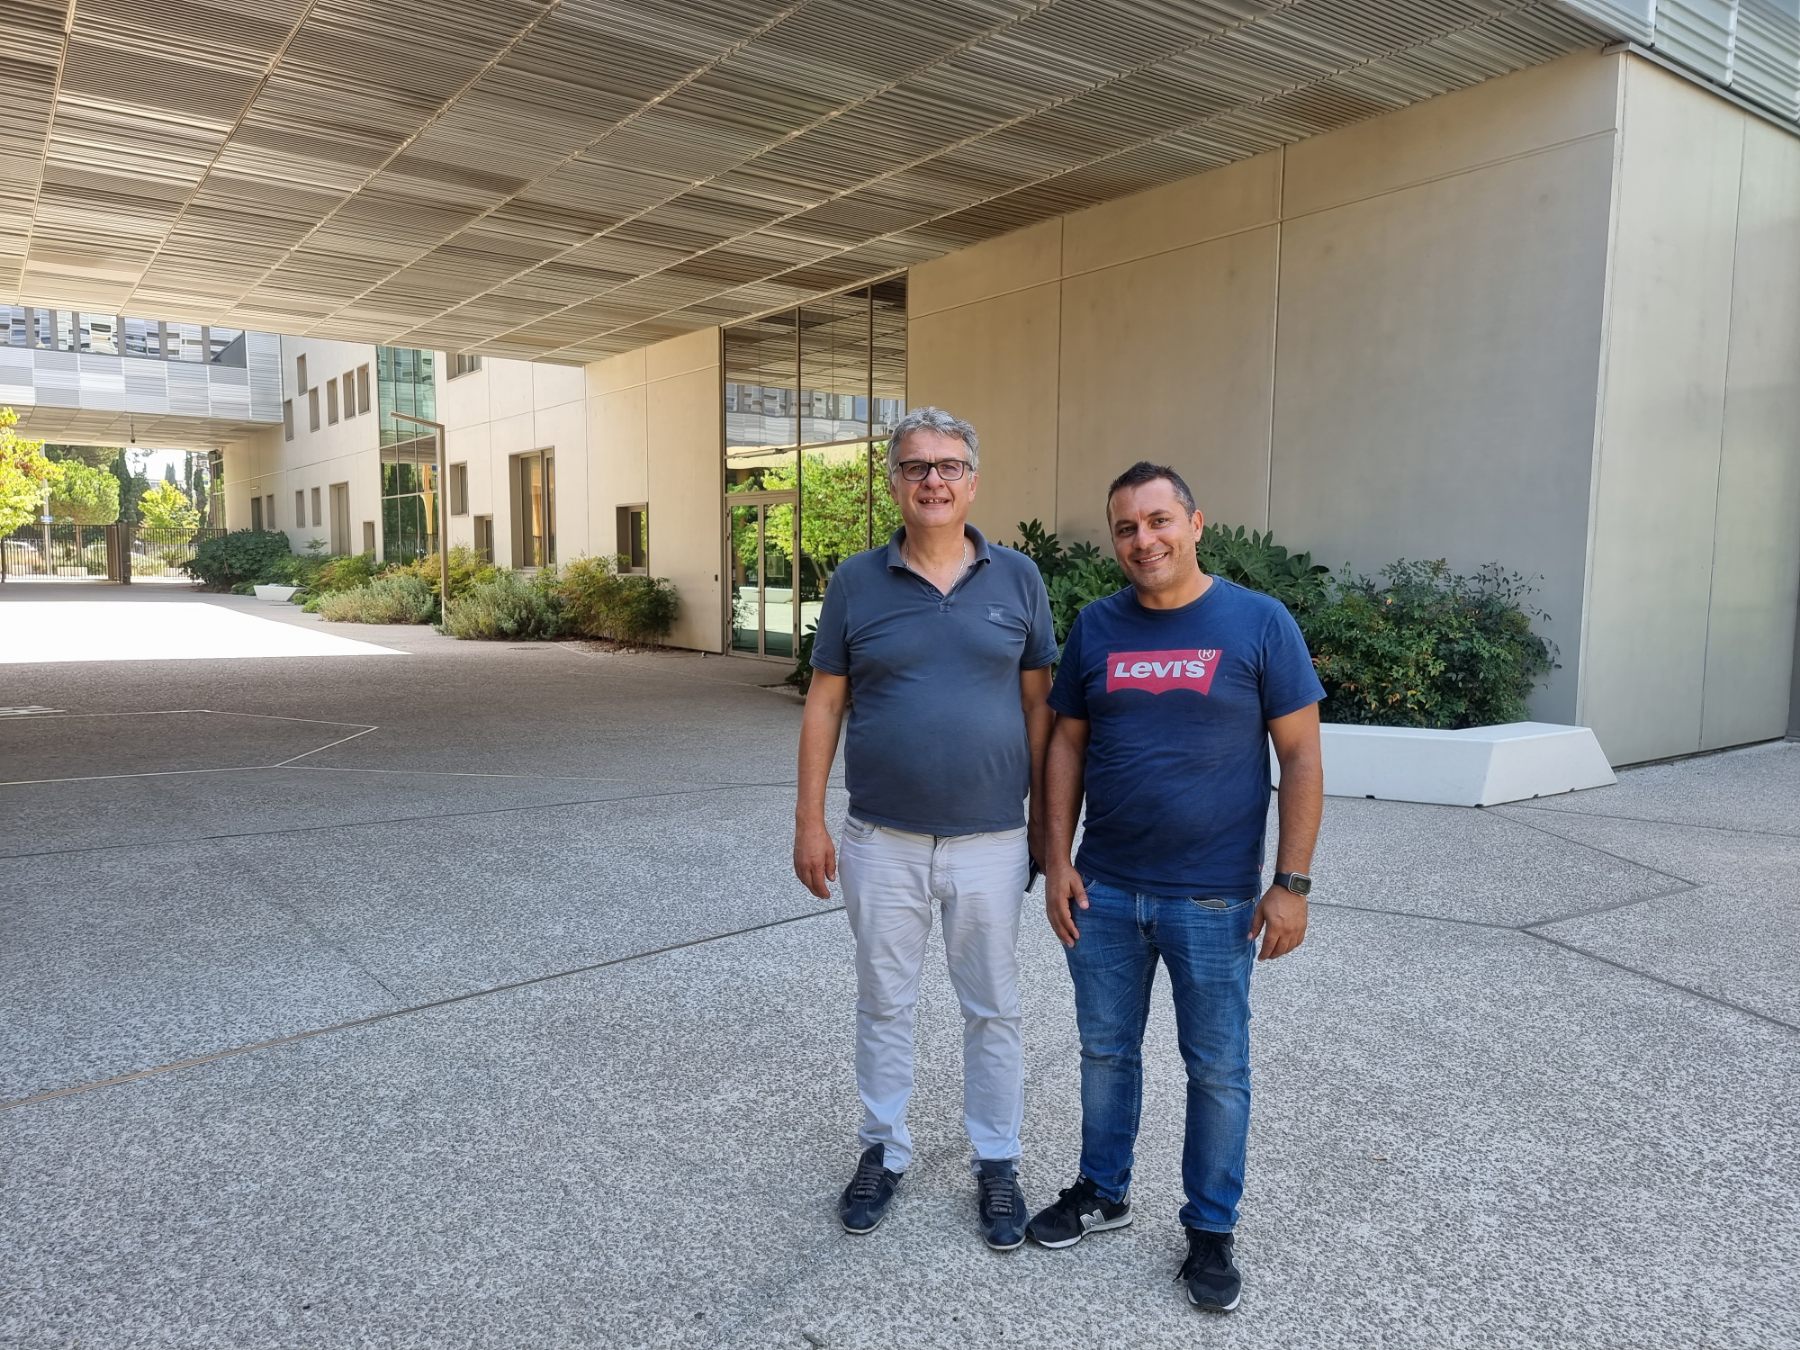 CANBIOSE secondment visit of Dr. Oleksiy Gogotsi and Veronika Zahorodna from MRC to European Institute of Membranes in Montpellier, France